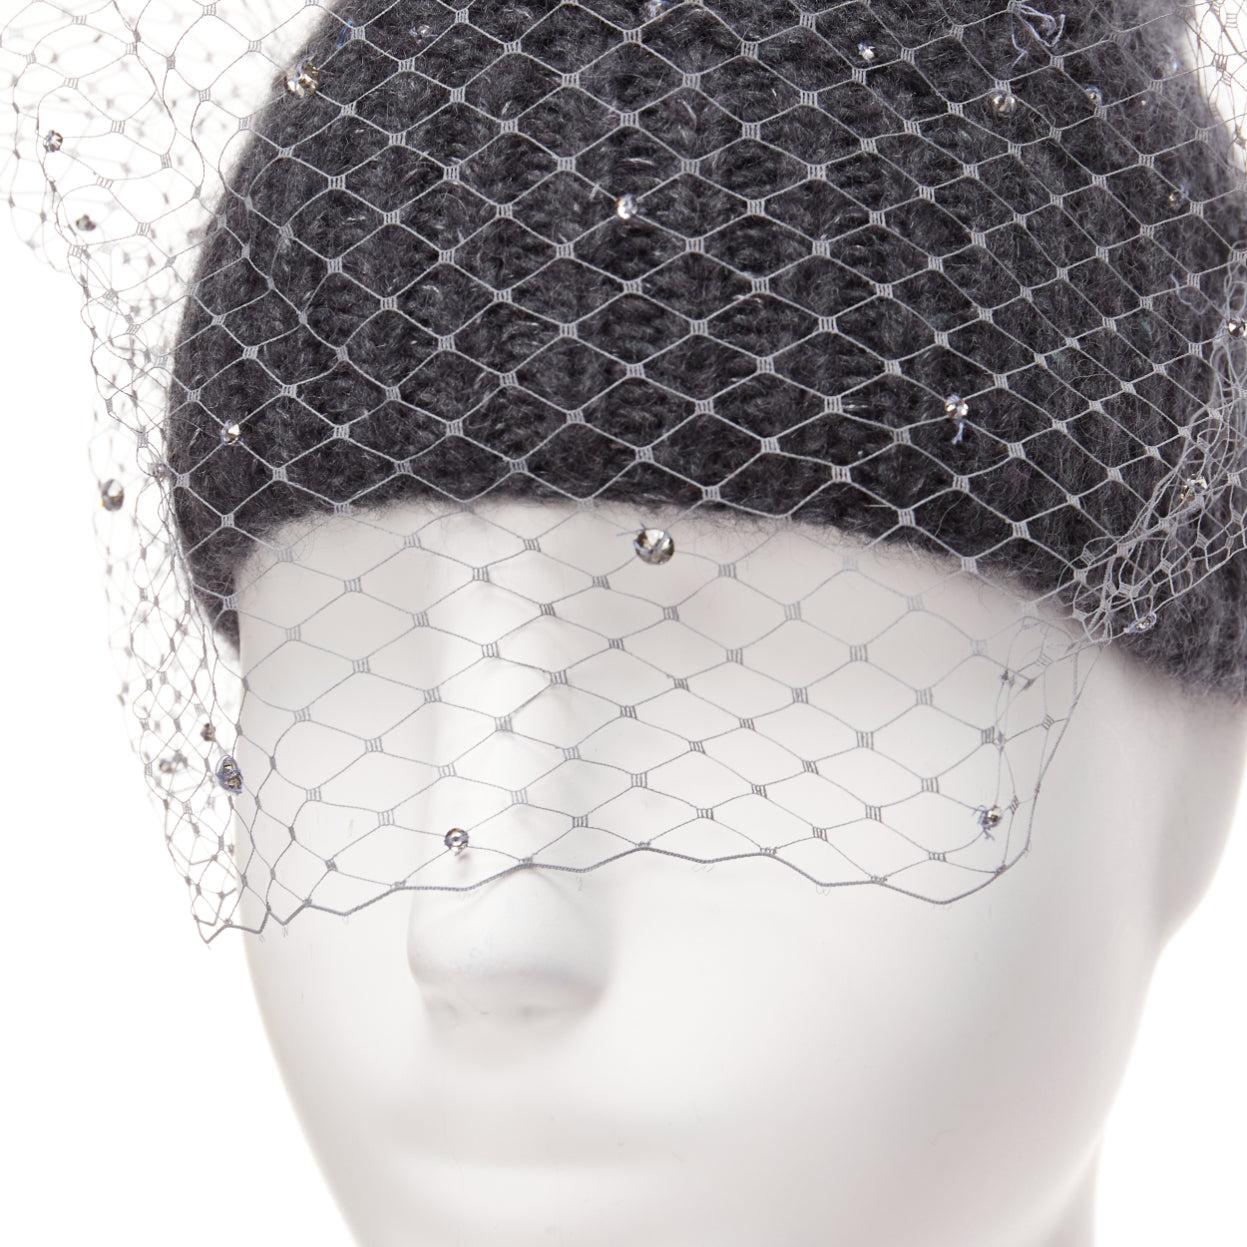 JENNIFER BEHR grey charcoal crystal beads veil round top beanie hat
Reference: AAWC/A00927
Brand: Jennifer Behr
Material: Fabric
Color: Grey, Clear
Pattern: Crystals
Closure: Slip On
Lining: Grey Fabric
Extra Details: Crystal embellished